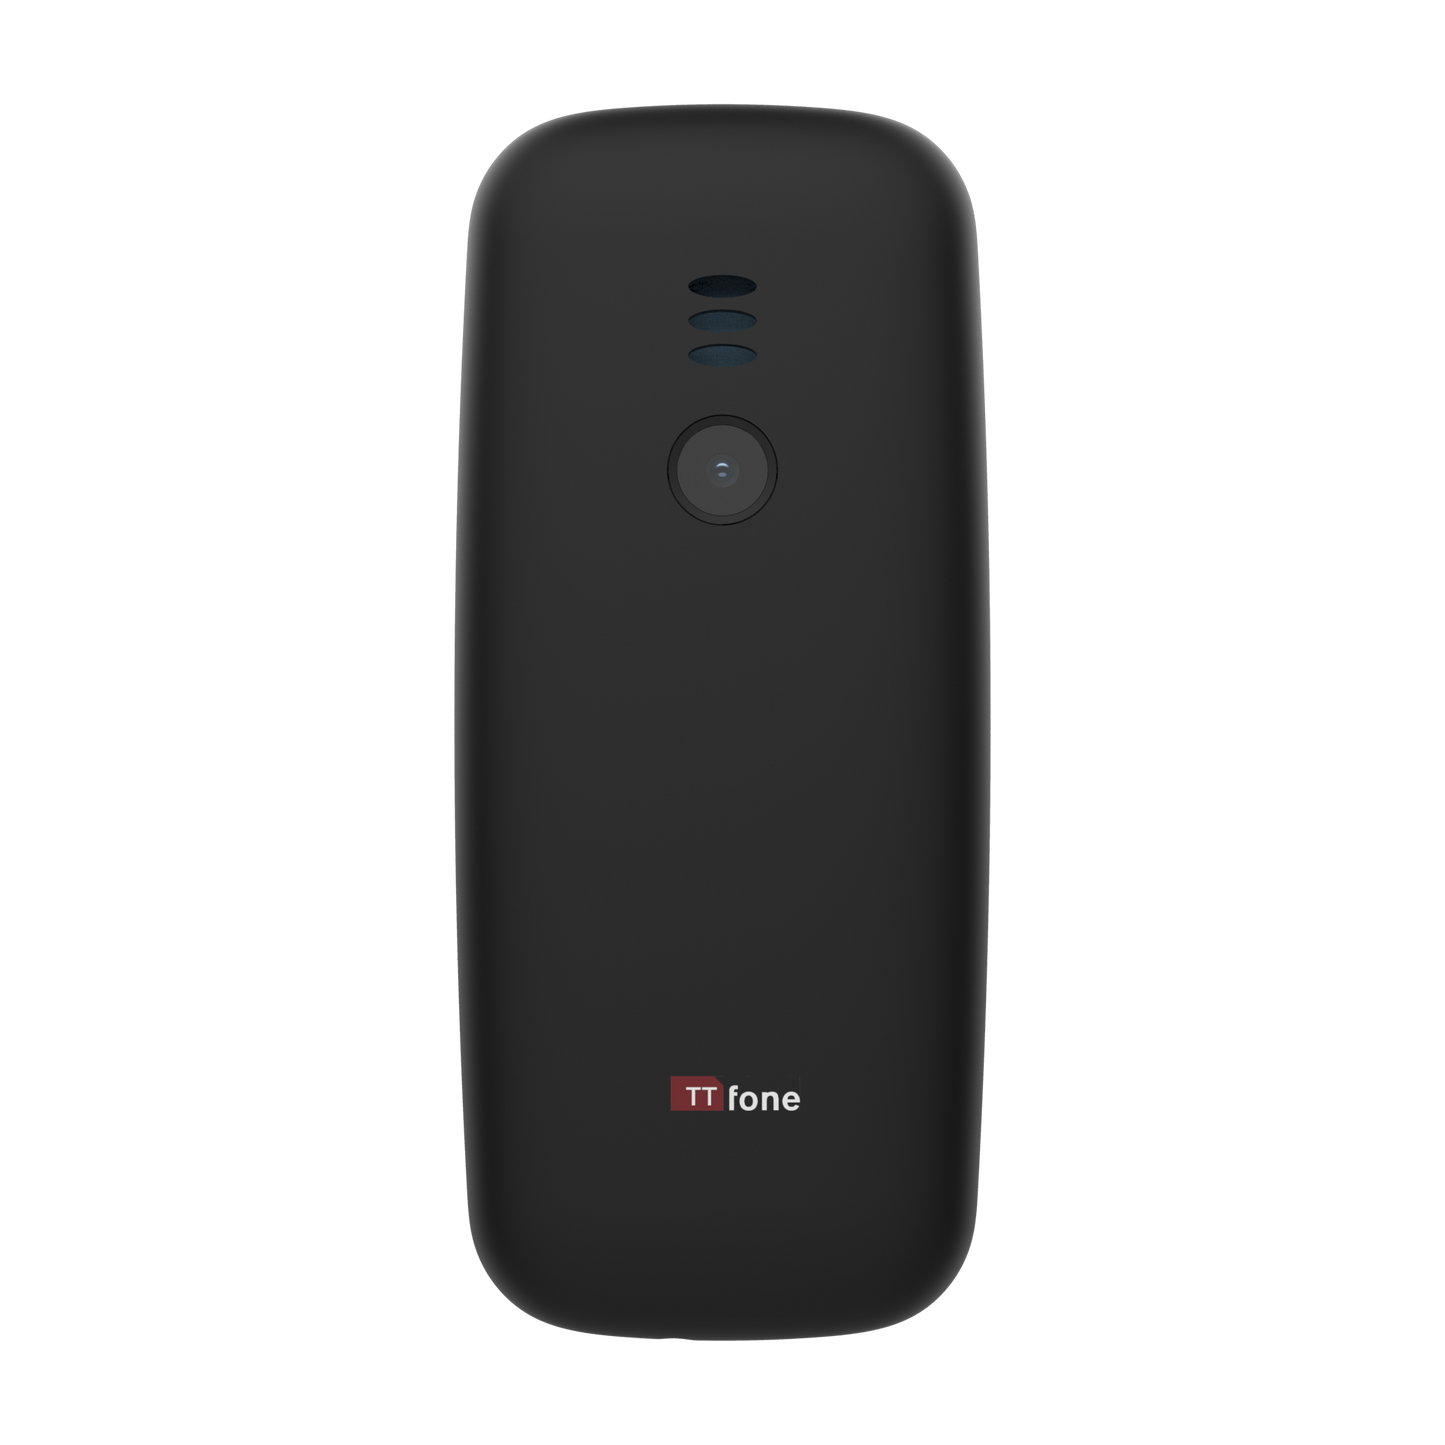 TTfone TT170 Black Dual SIM mobile - Warehouse Deals with USB Cable, Vodafone Pay As You Go